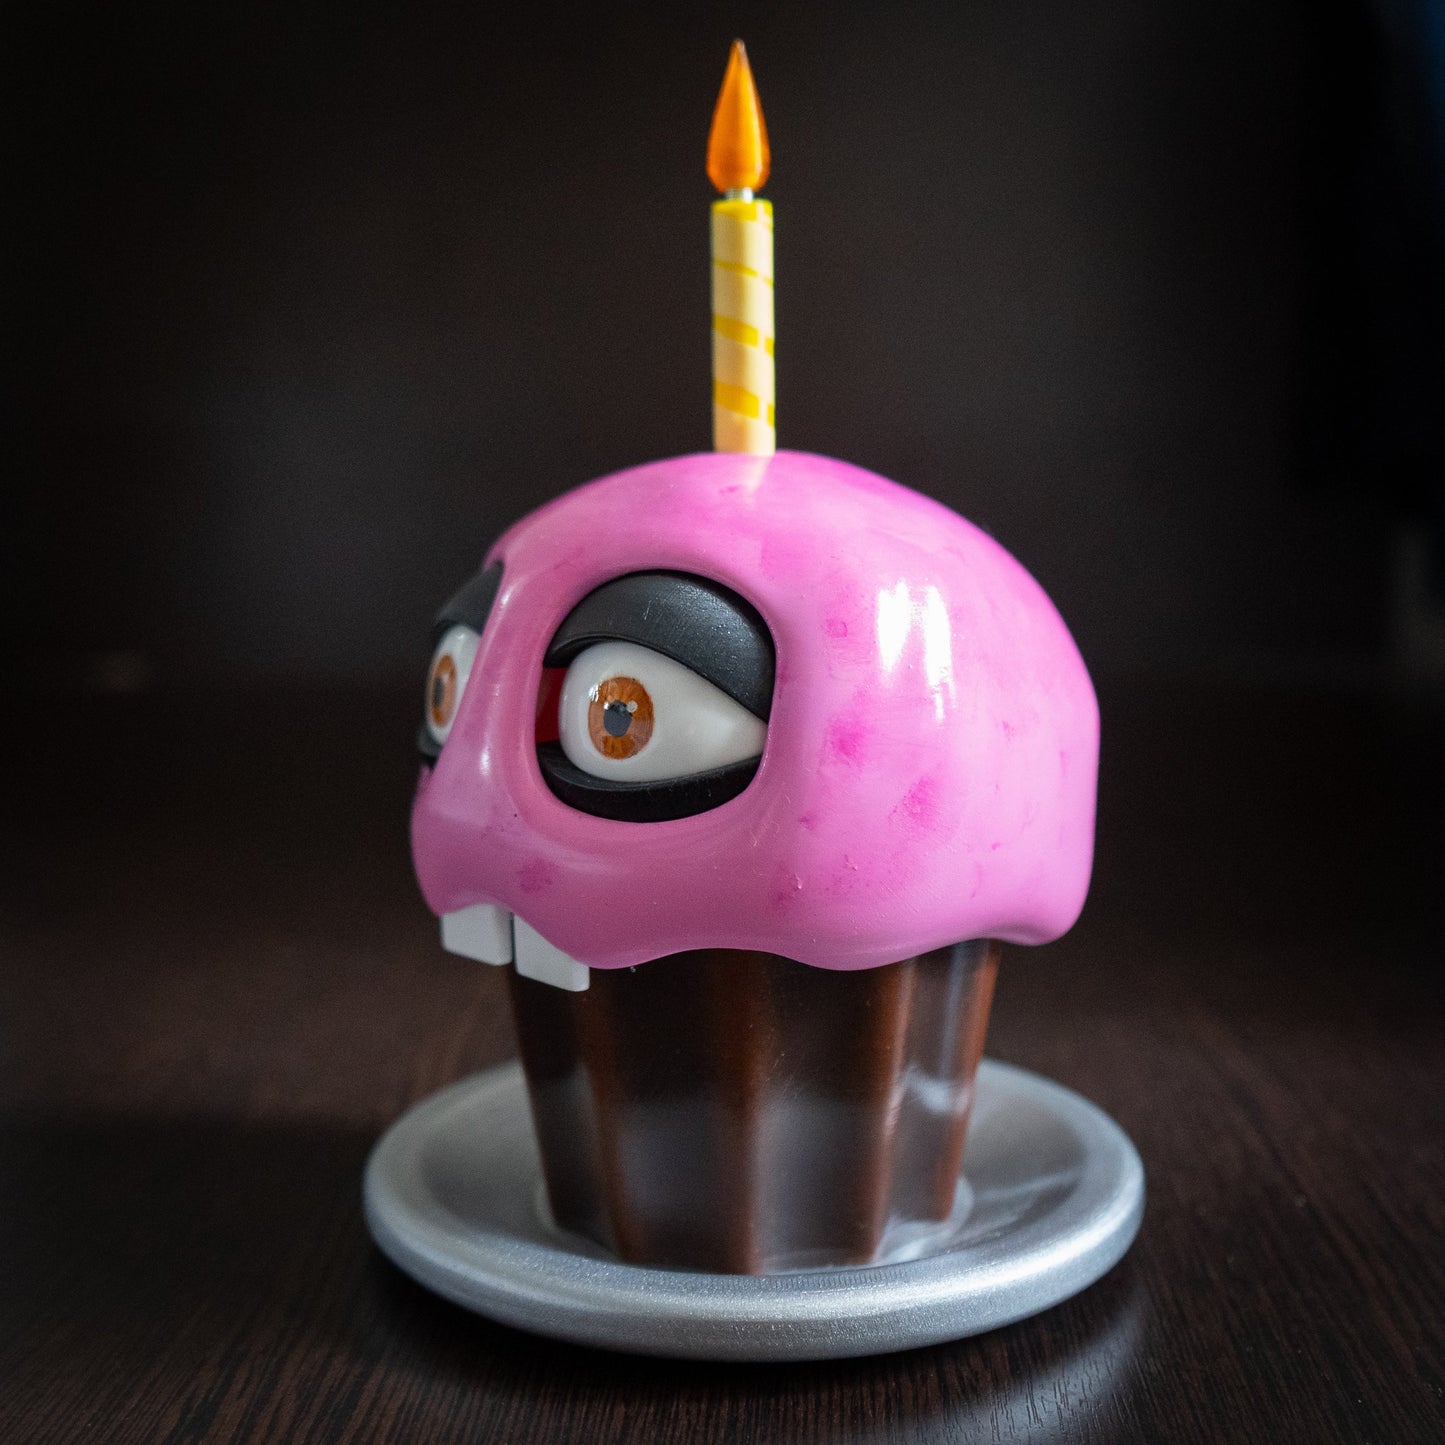 Mr. Cupcake animatronic from the Five Nights at Freddy's (FNAF)